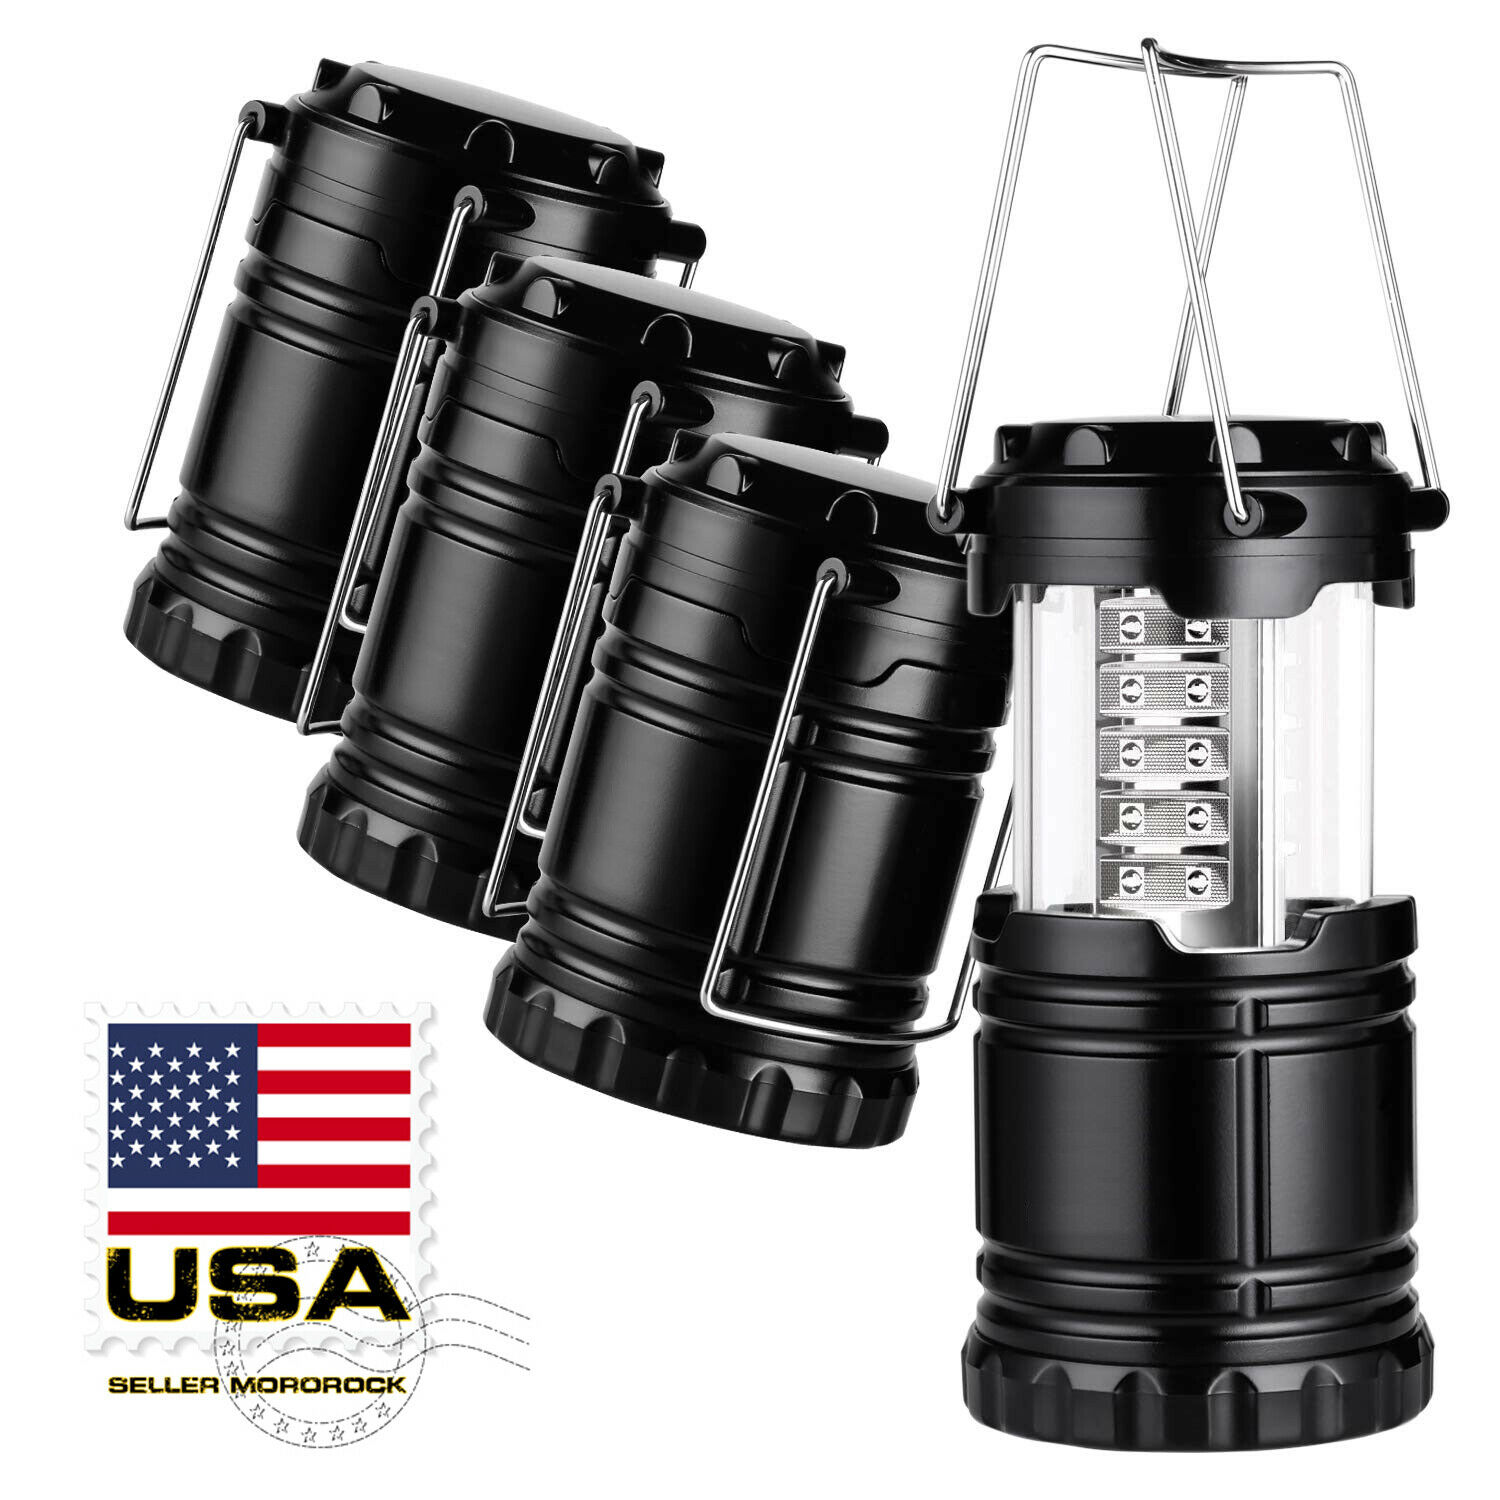 4x Collapsible Led Lanterns Tac Light Emergency Outdoor Hiking Camping Lamps